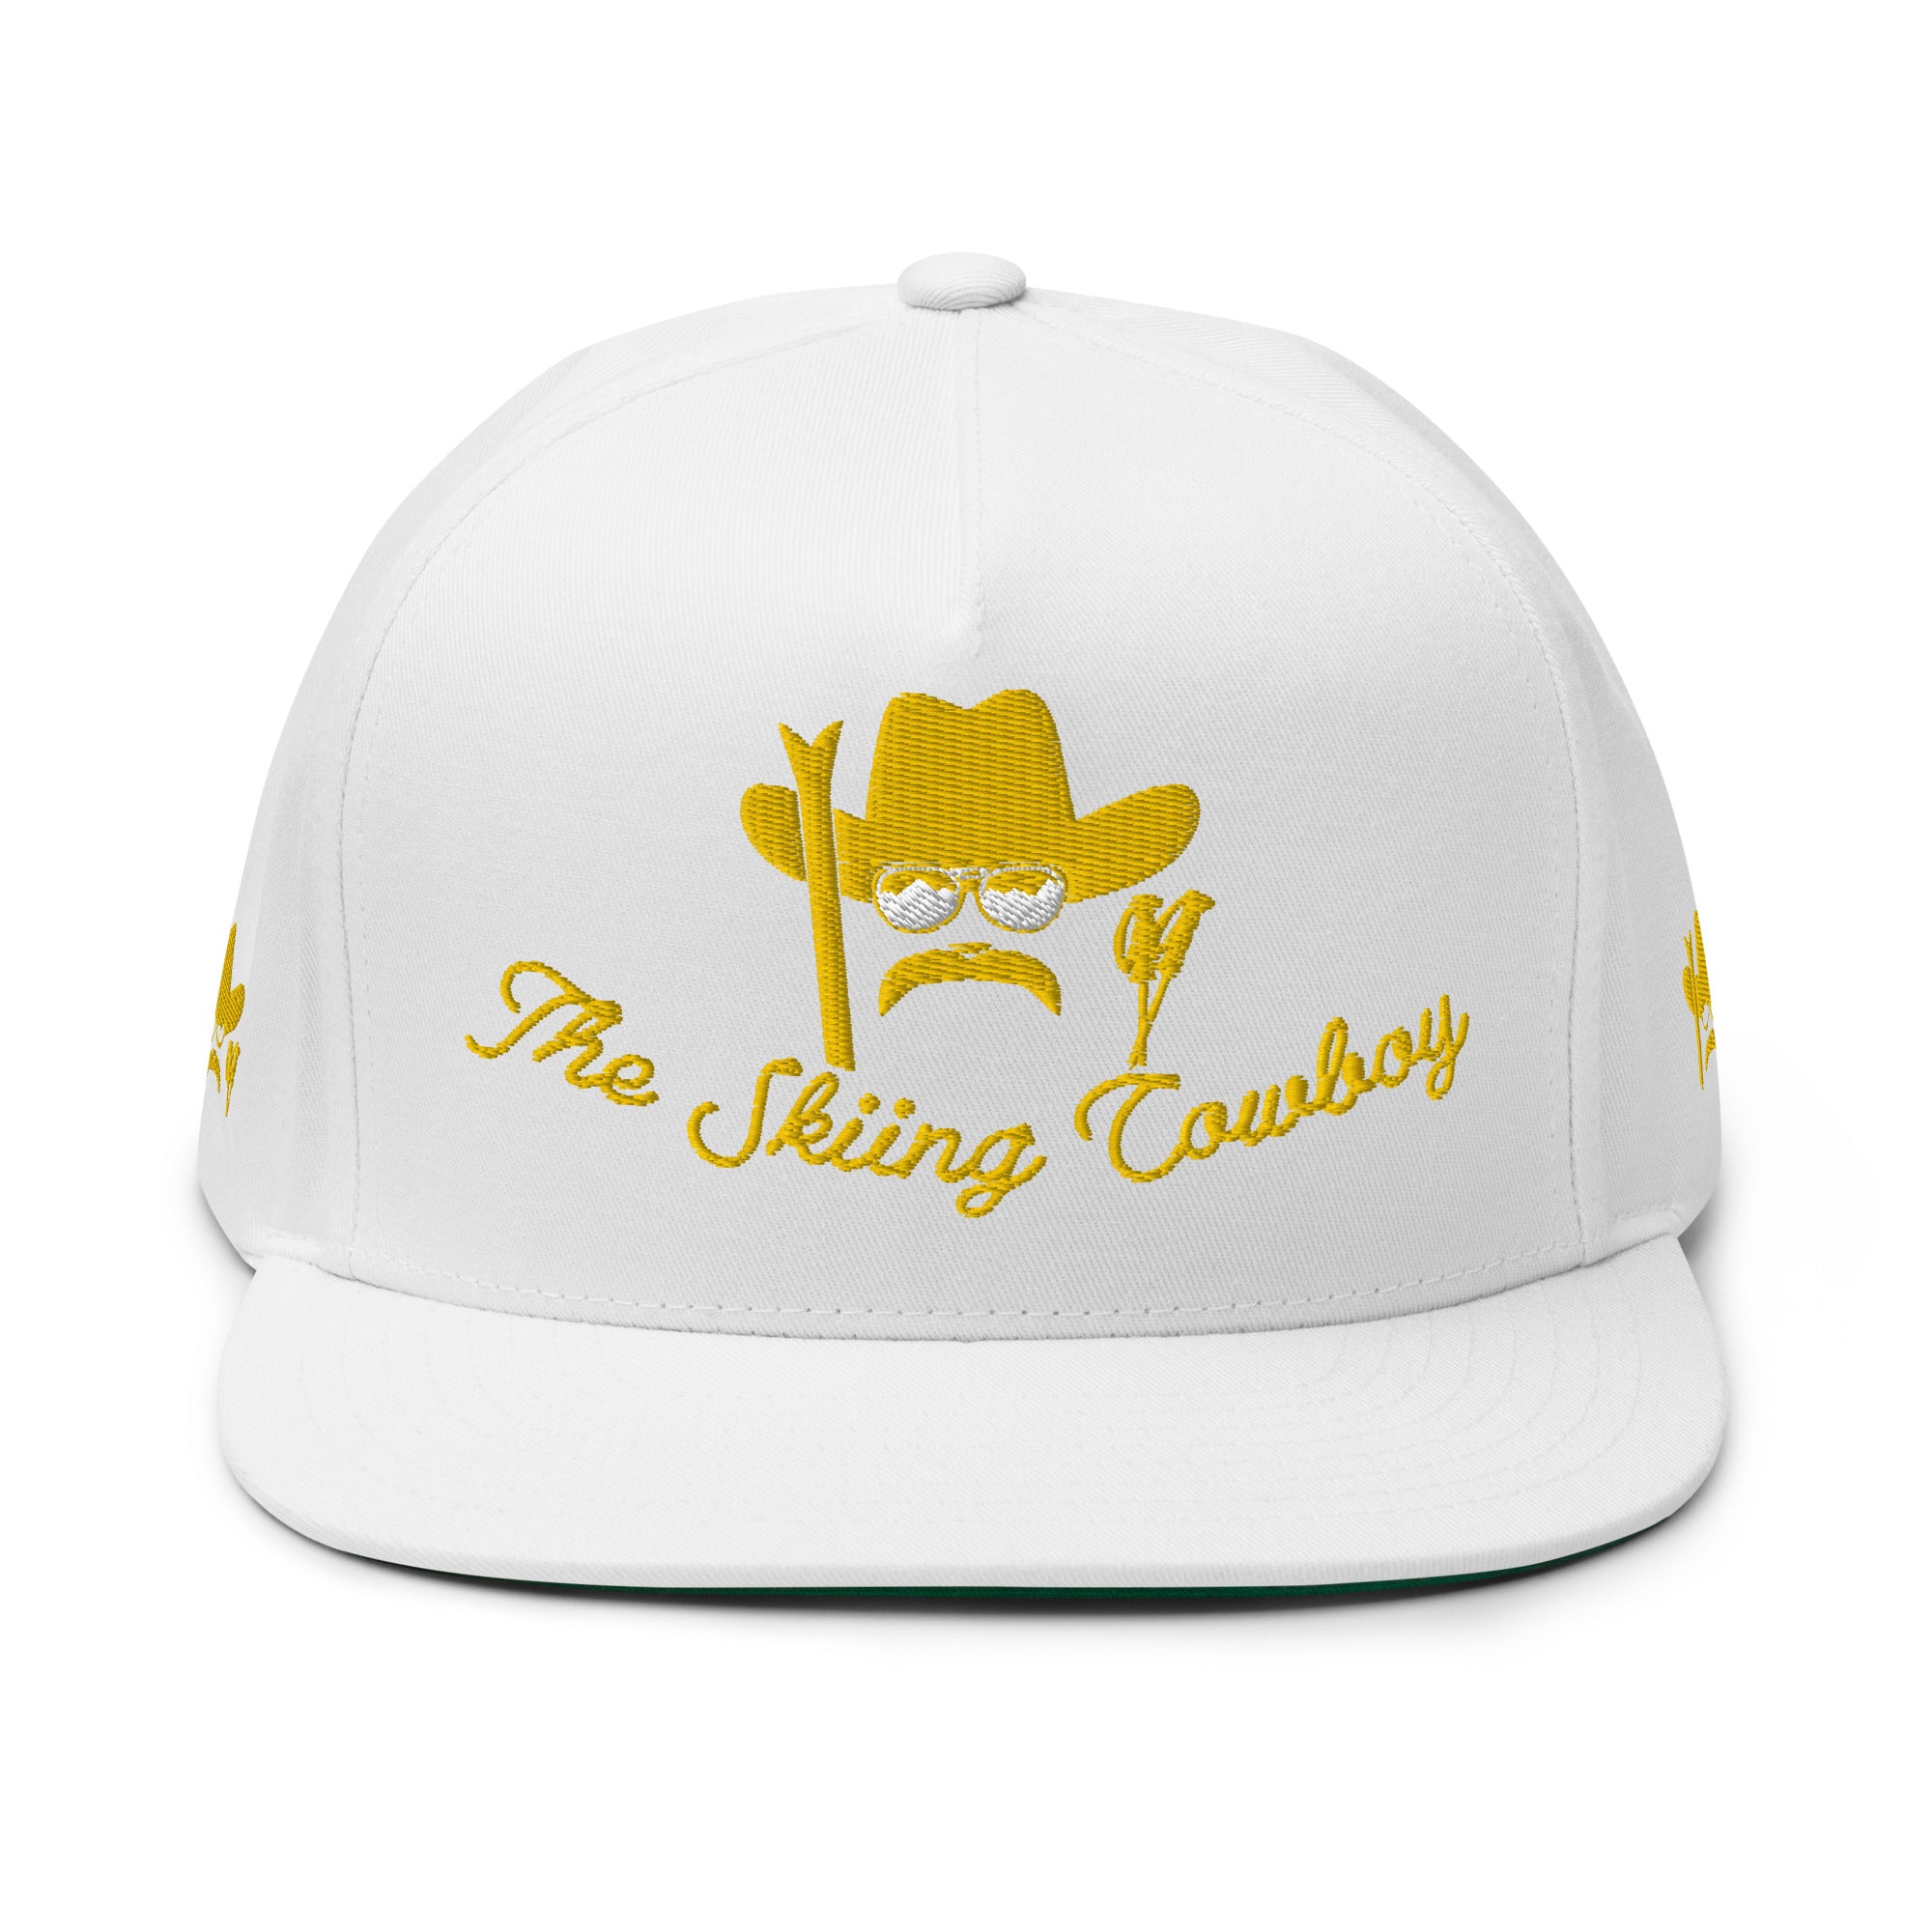 Flat Bill Cap The Skiing Cowboy Gold embroidered pattern (3 sides)